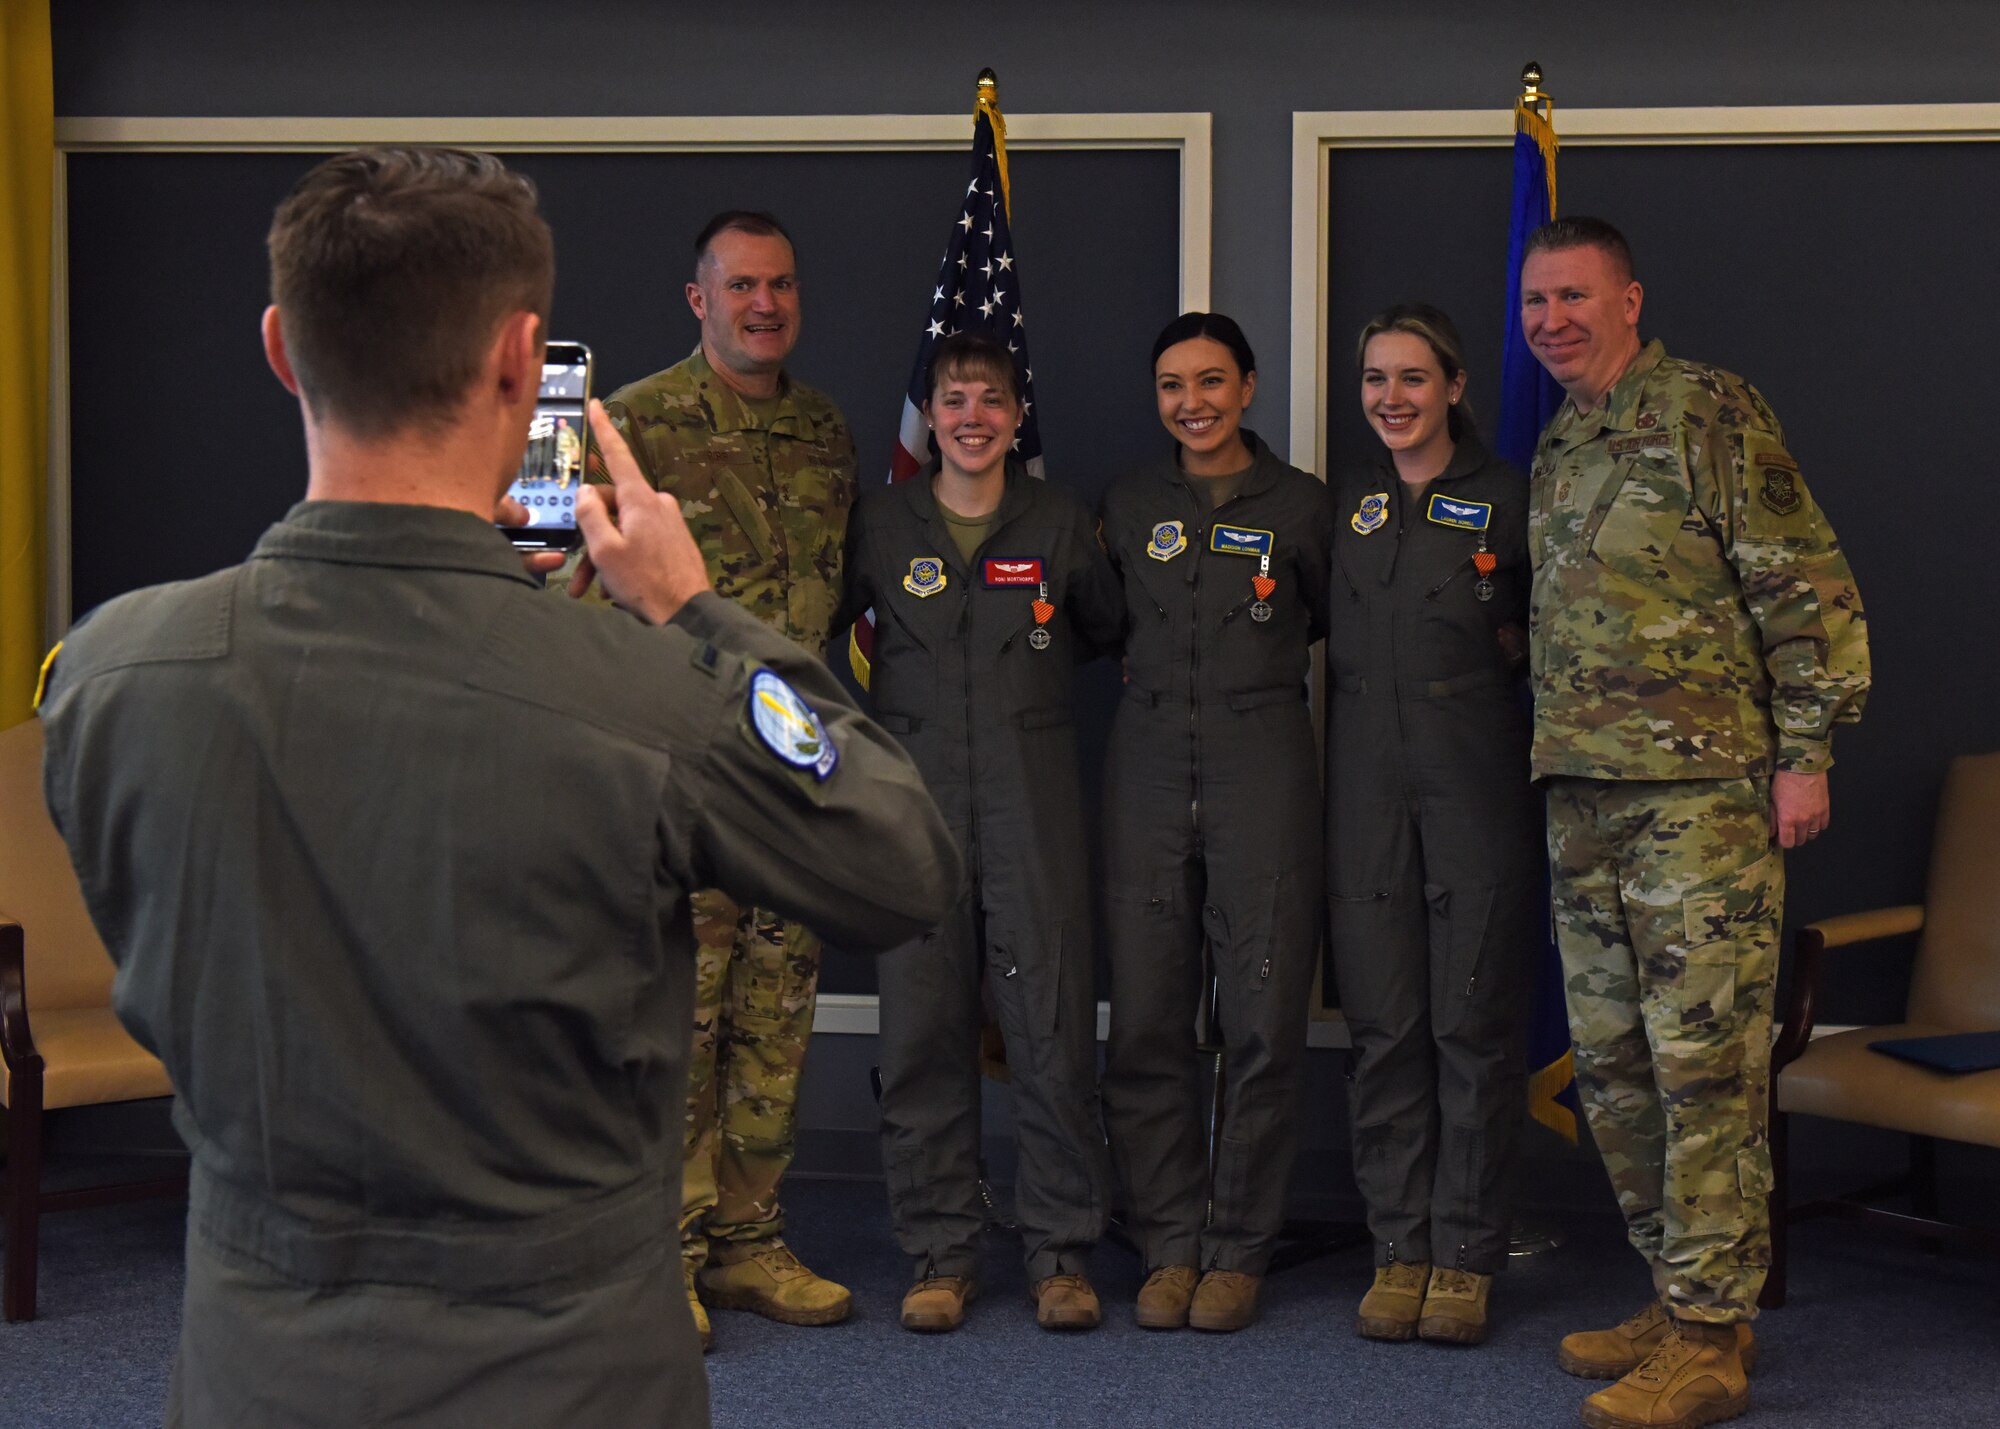 U.S. Air Force Maj. Gen. Thad Bibb, 18th Air Force commander, and U.S. Air Force Chief Master Sgt. Chad Bickley, 18th AF command chief, pose for a photo after presenting Air Force Combat Action Medals to three 62nd Airlift Wing pilots at Joint Base Lewis-McChord, Washington, March 14, 2022. U.S. Air Force Capt. Roni Morthorpe, 1st Lt. Madison Lohman and 1st Lt. Lauren Norell received medals for their honorable service during Operation Allies Refuge in August 2021. (U.S. Air Force photo/Senior Airman Zoe Thacker)